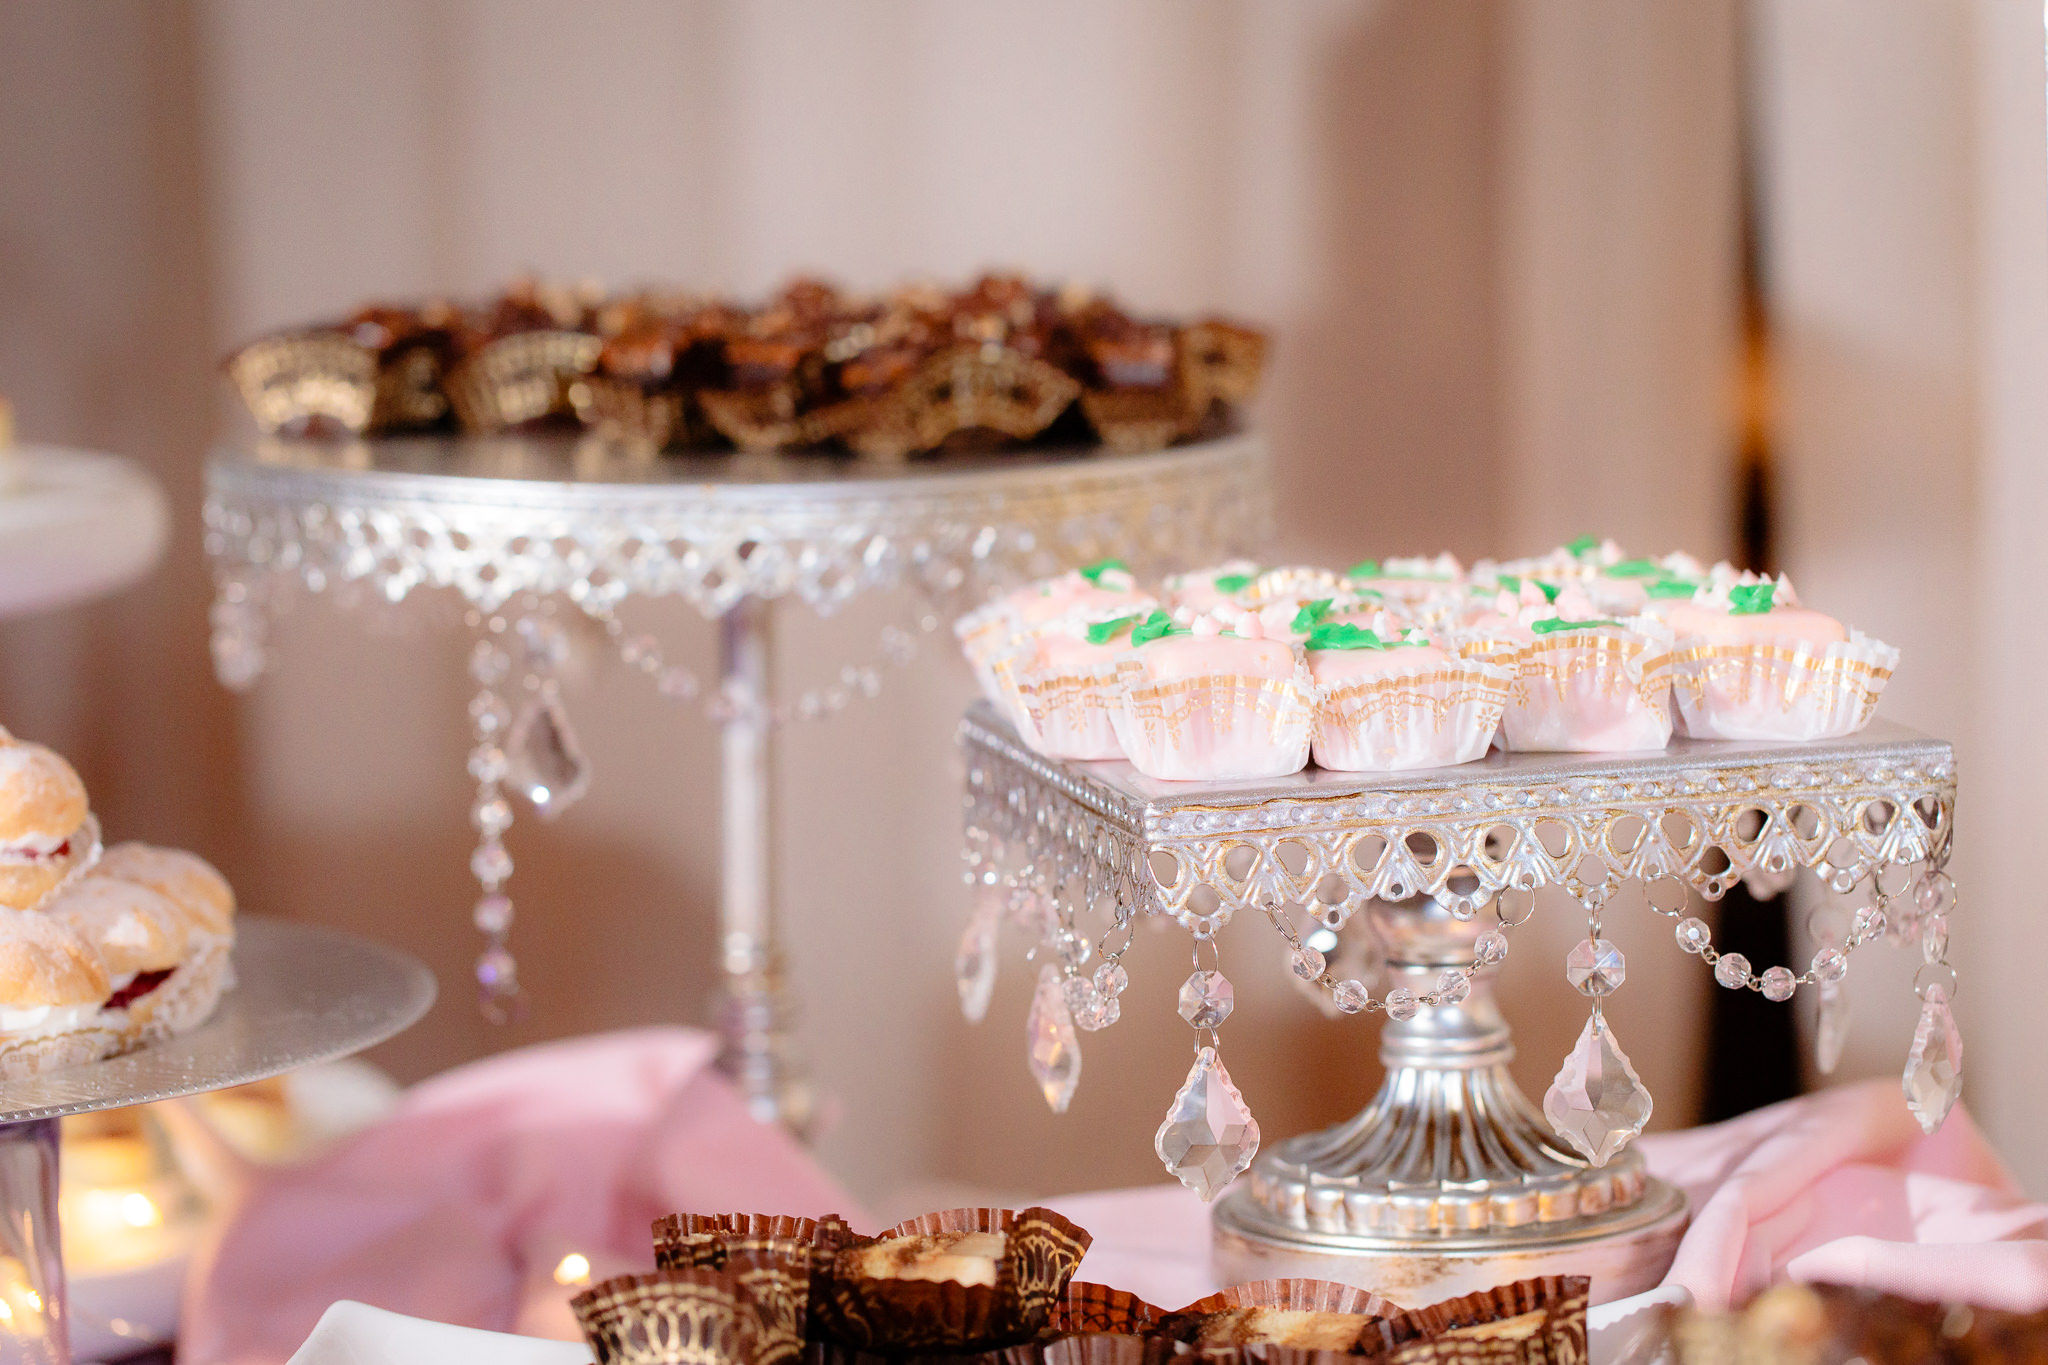 Cookie table done by Rania's Catering for a wedding recpetion at The Pennsylvanian